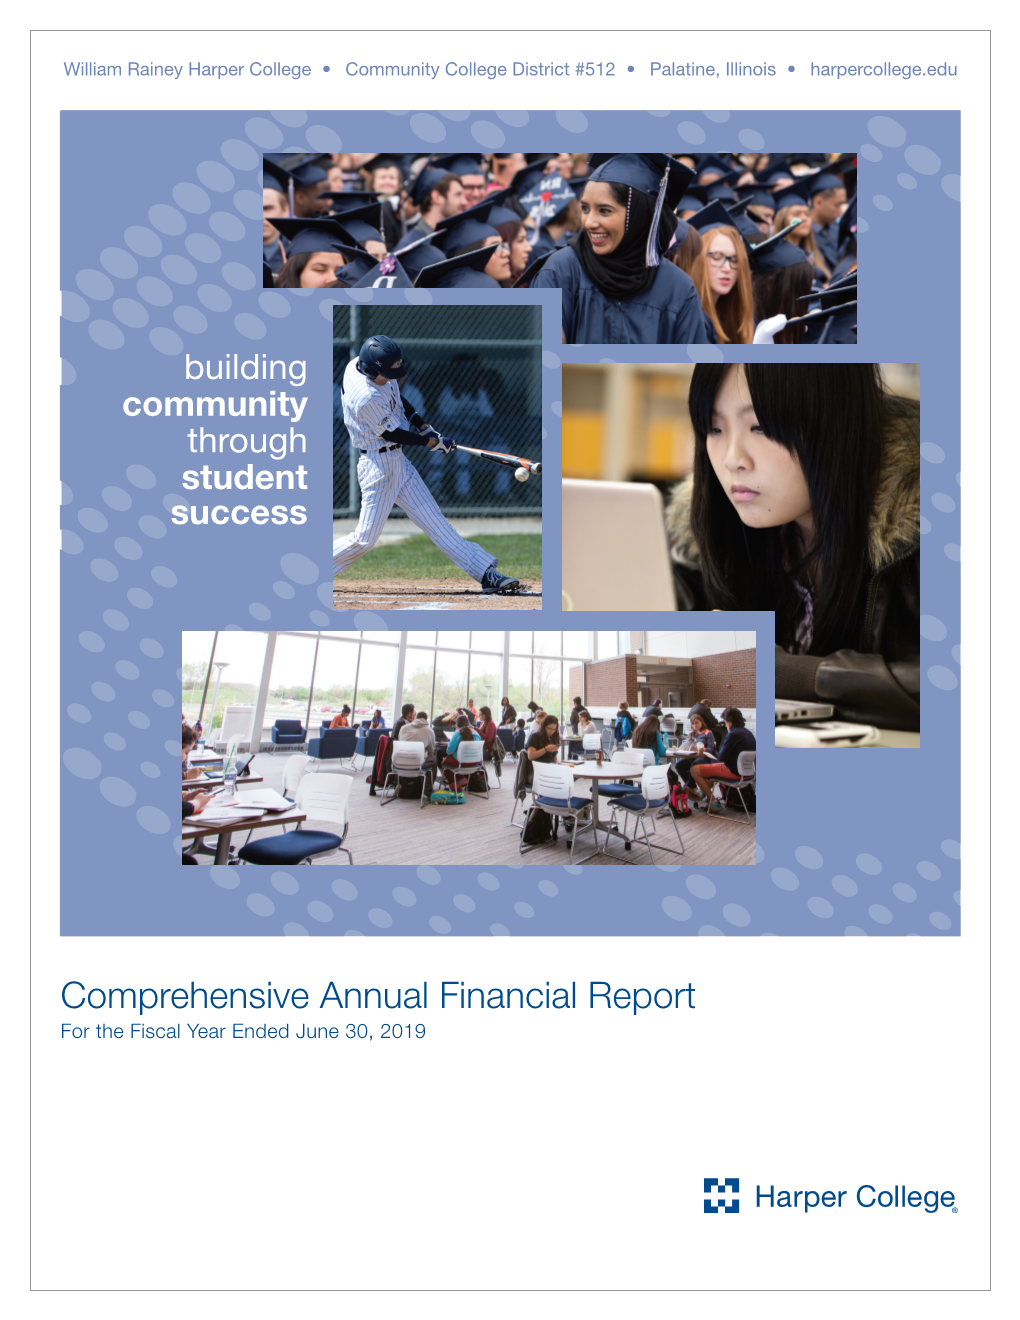 Comprehensive Annual Financial Report for the Fiscal Year Ended June 30, 2019